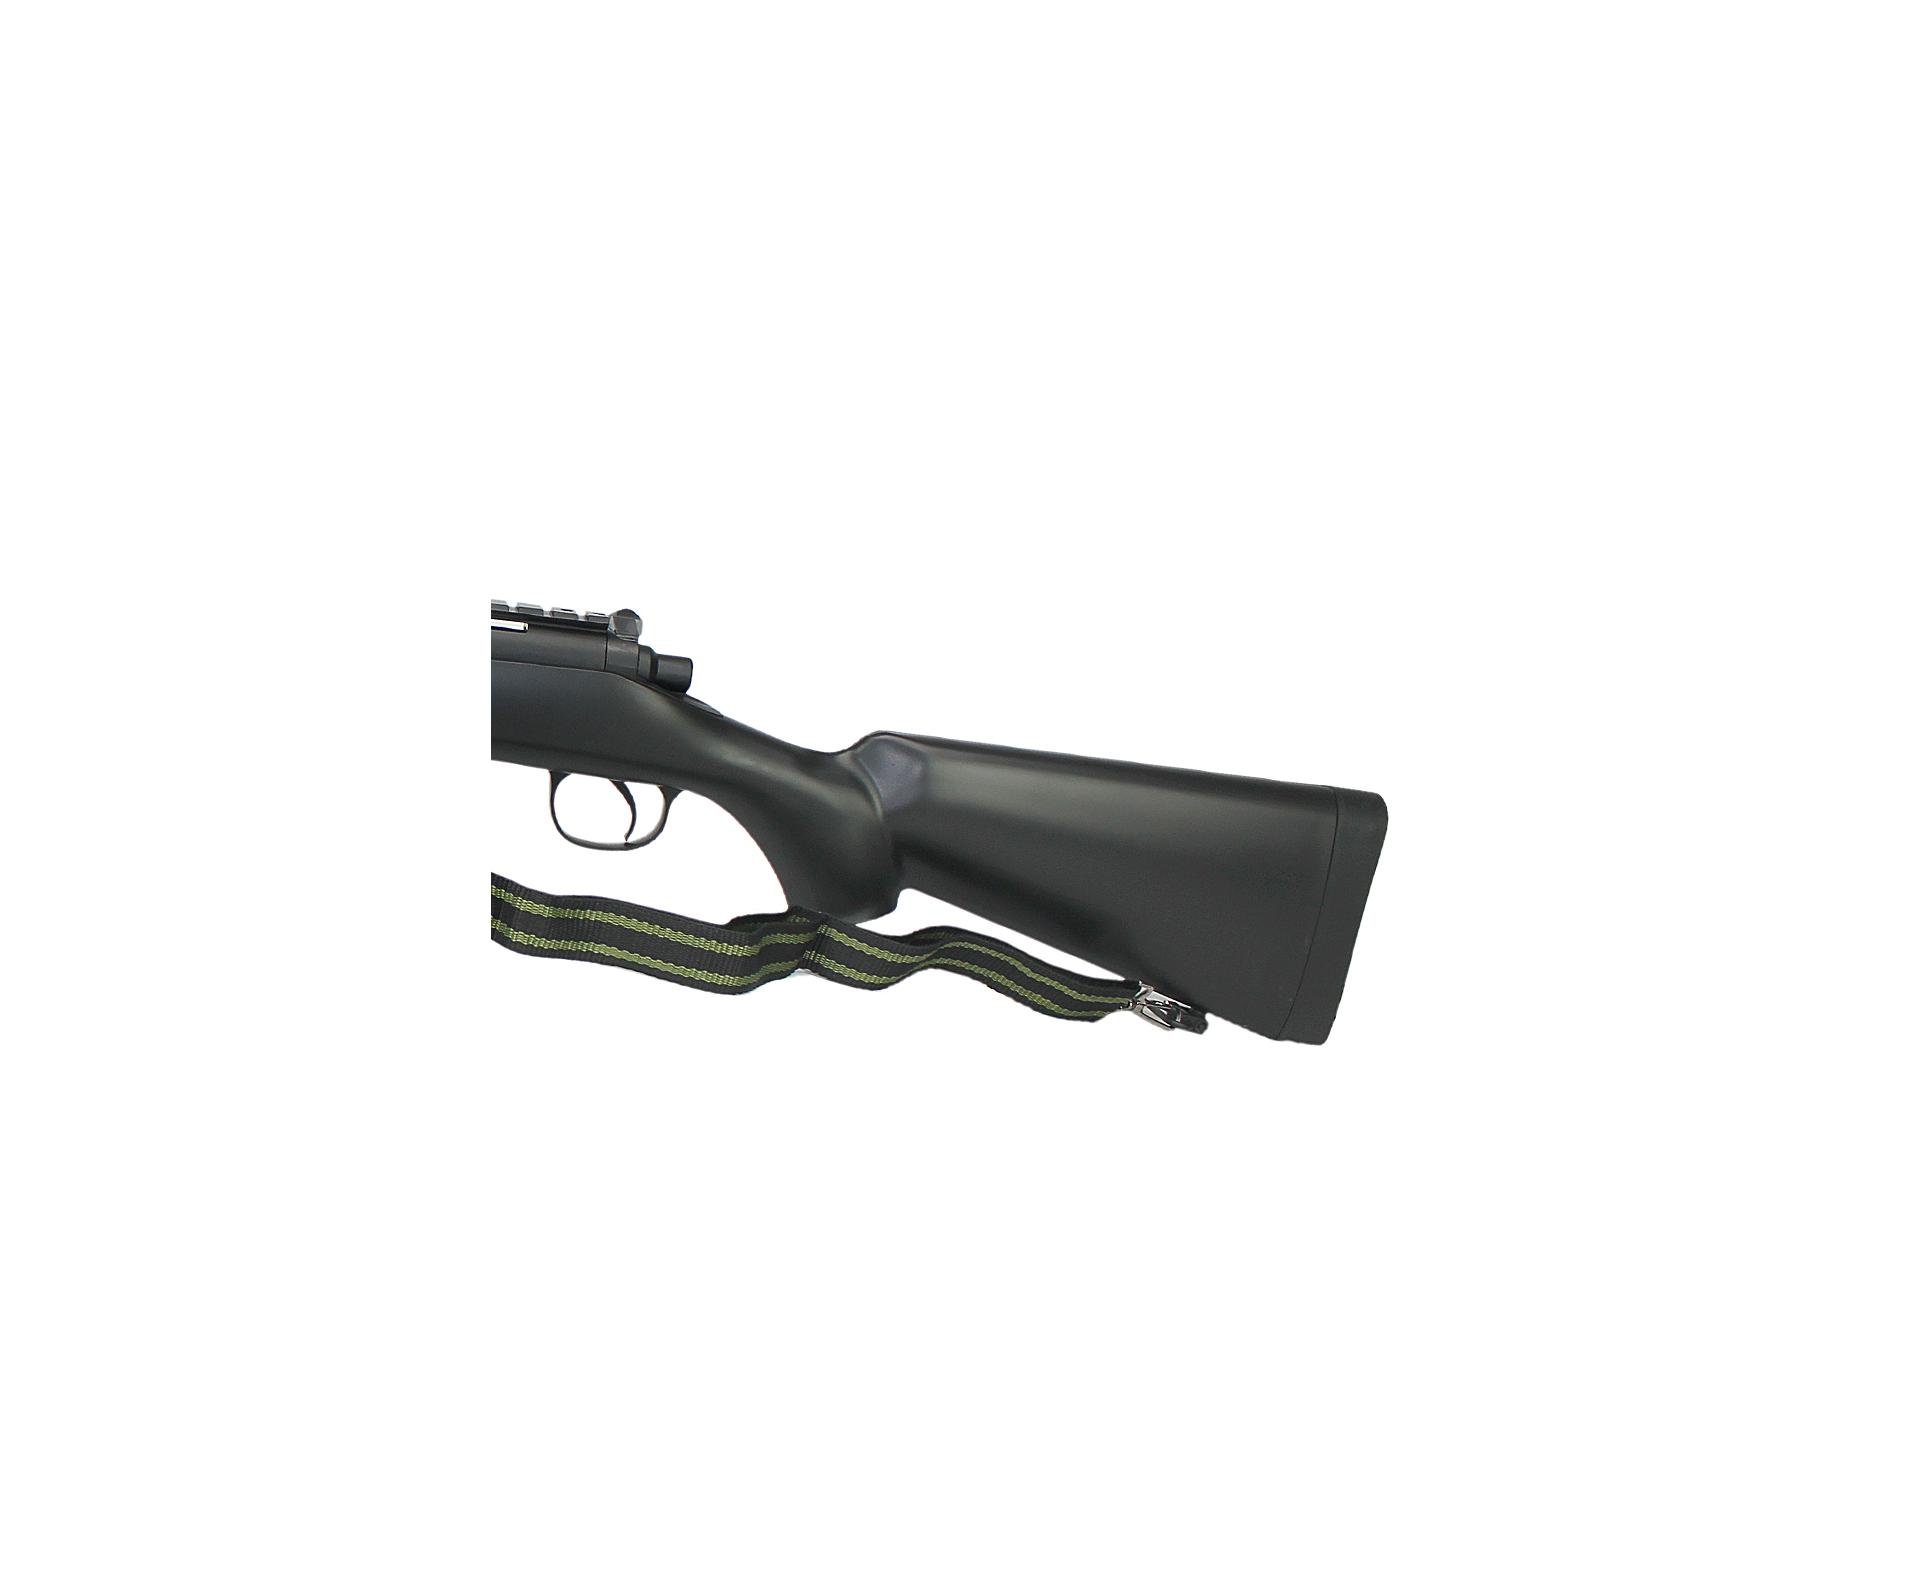 Rifle Airsoft Sniper Spring Vsr-10 Mb-07a Black 6,0mm Well